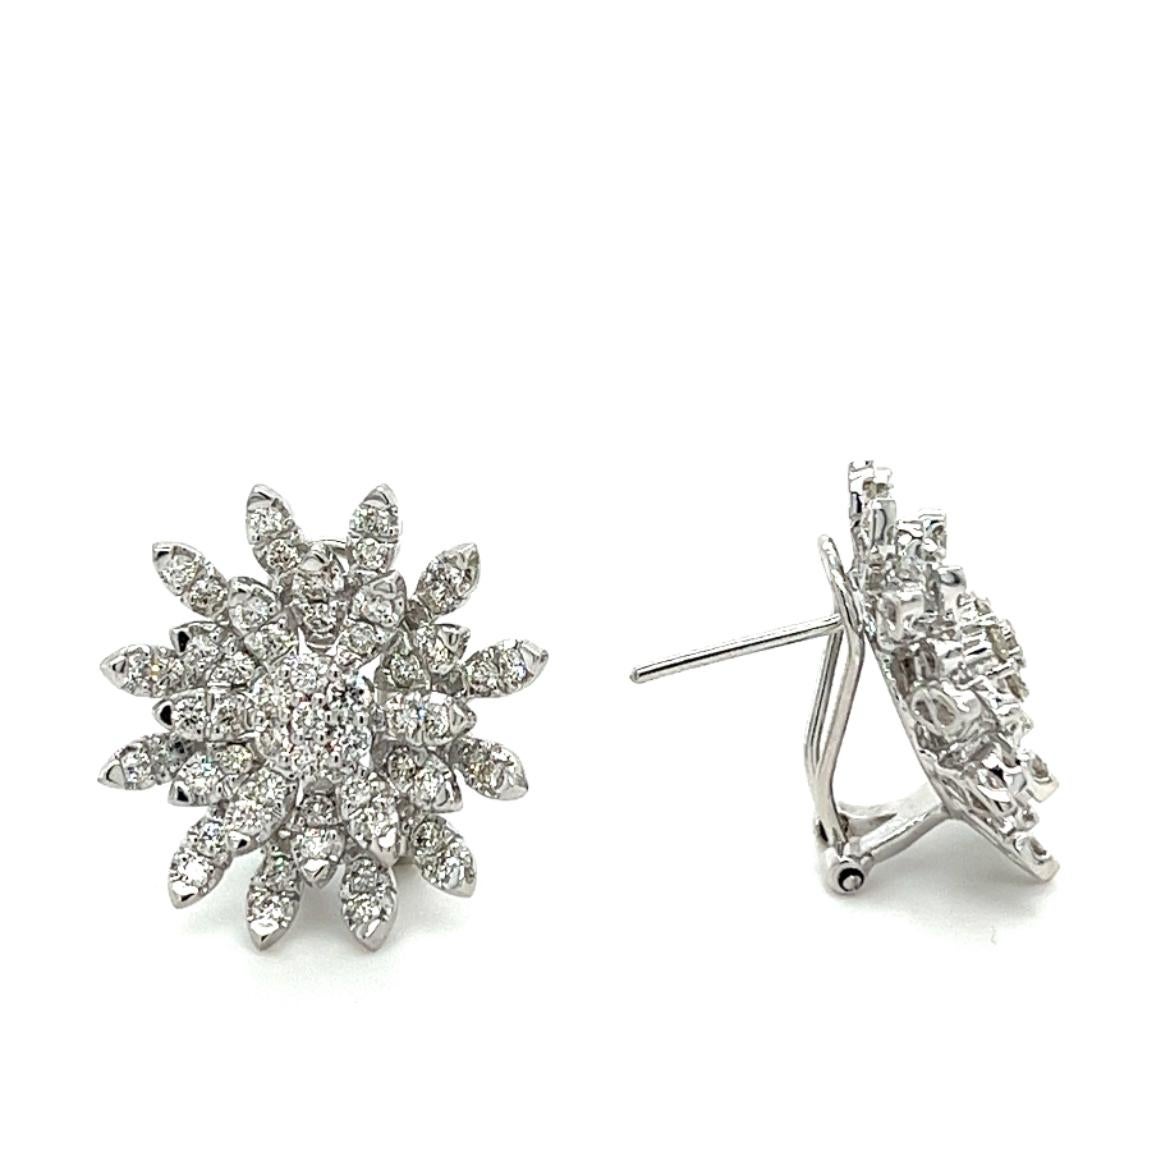 18K White Gold Diamond Snowflake Stud Earrings

18K White Gold - 9.639 GM
110 Diamonds - 1.695 CT

Althoff Jewelry's classic diamond earrings captivate with their exquisite snowflake design. Expertly crafted with meticulously cut diamonds, these